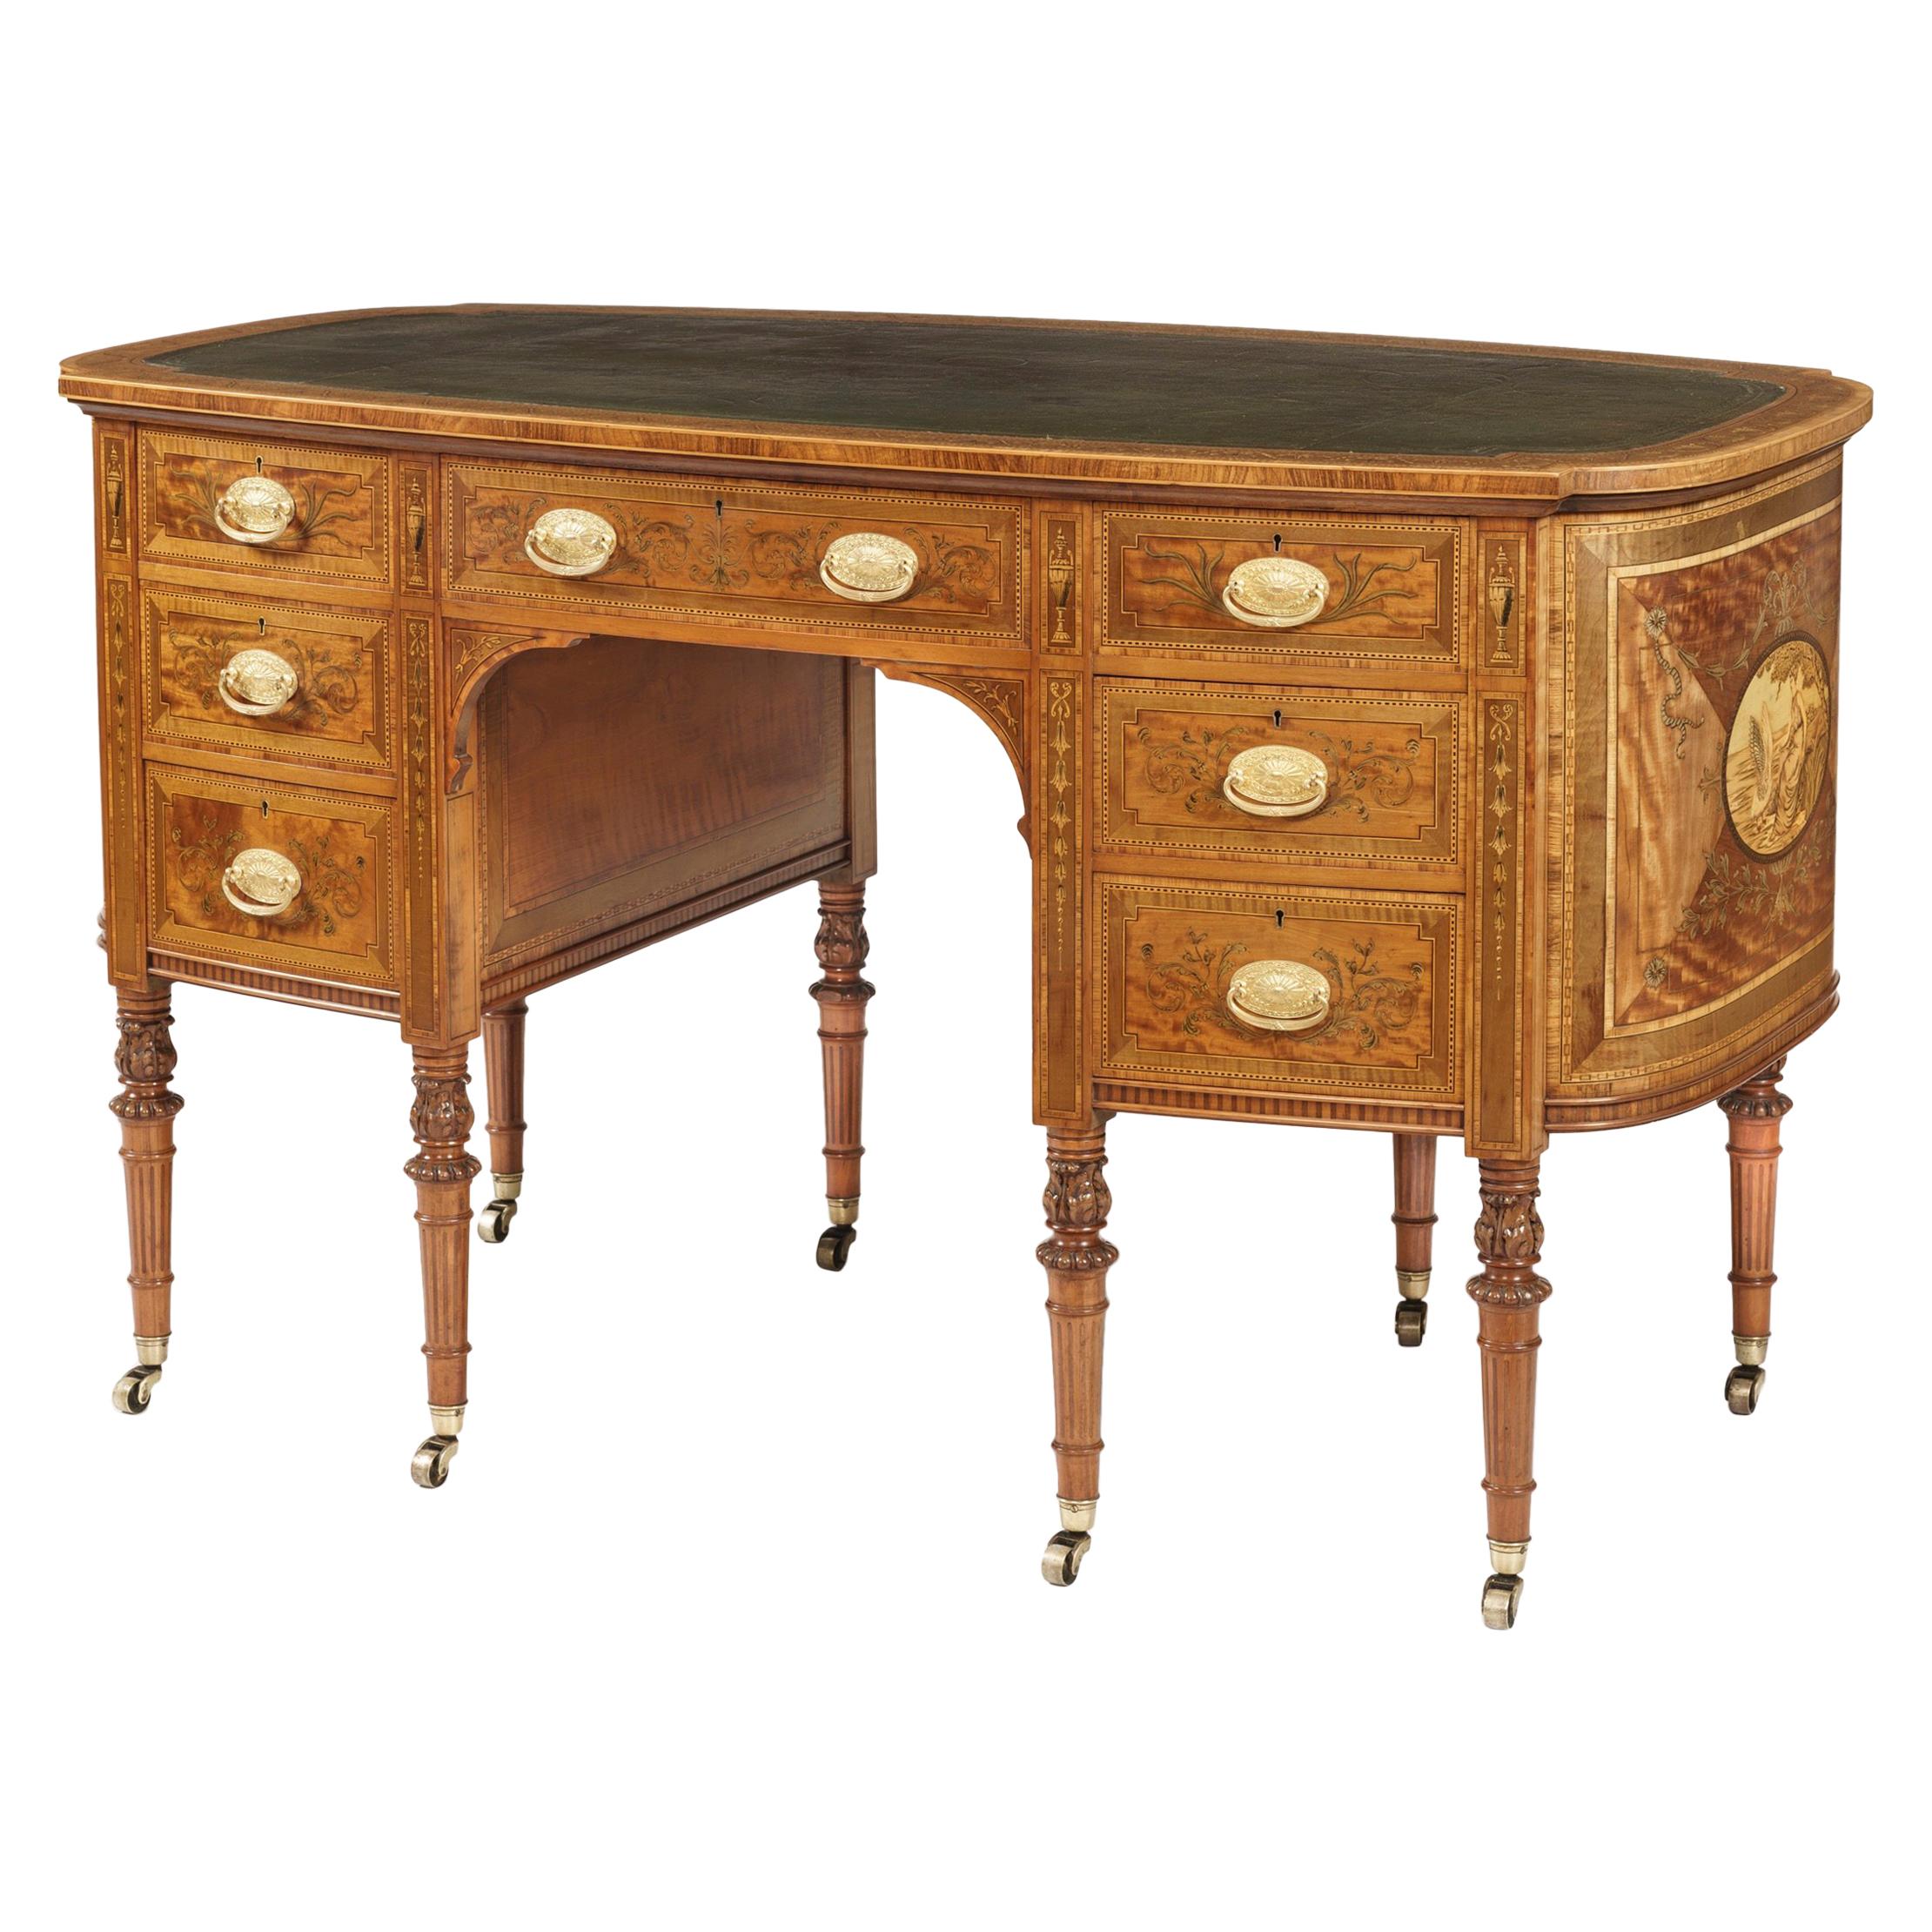 19th Century Satinwood and Marquetry Inlay Desk in the Adam Manner by Maple & Co